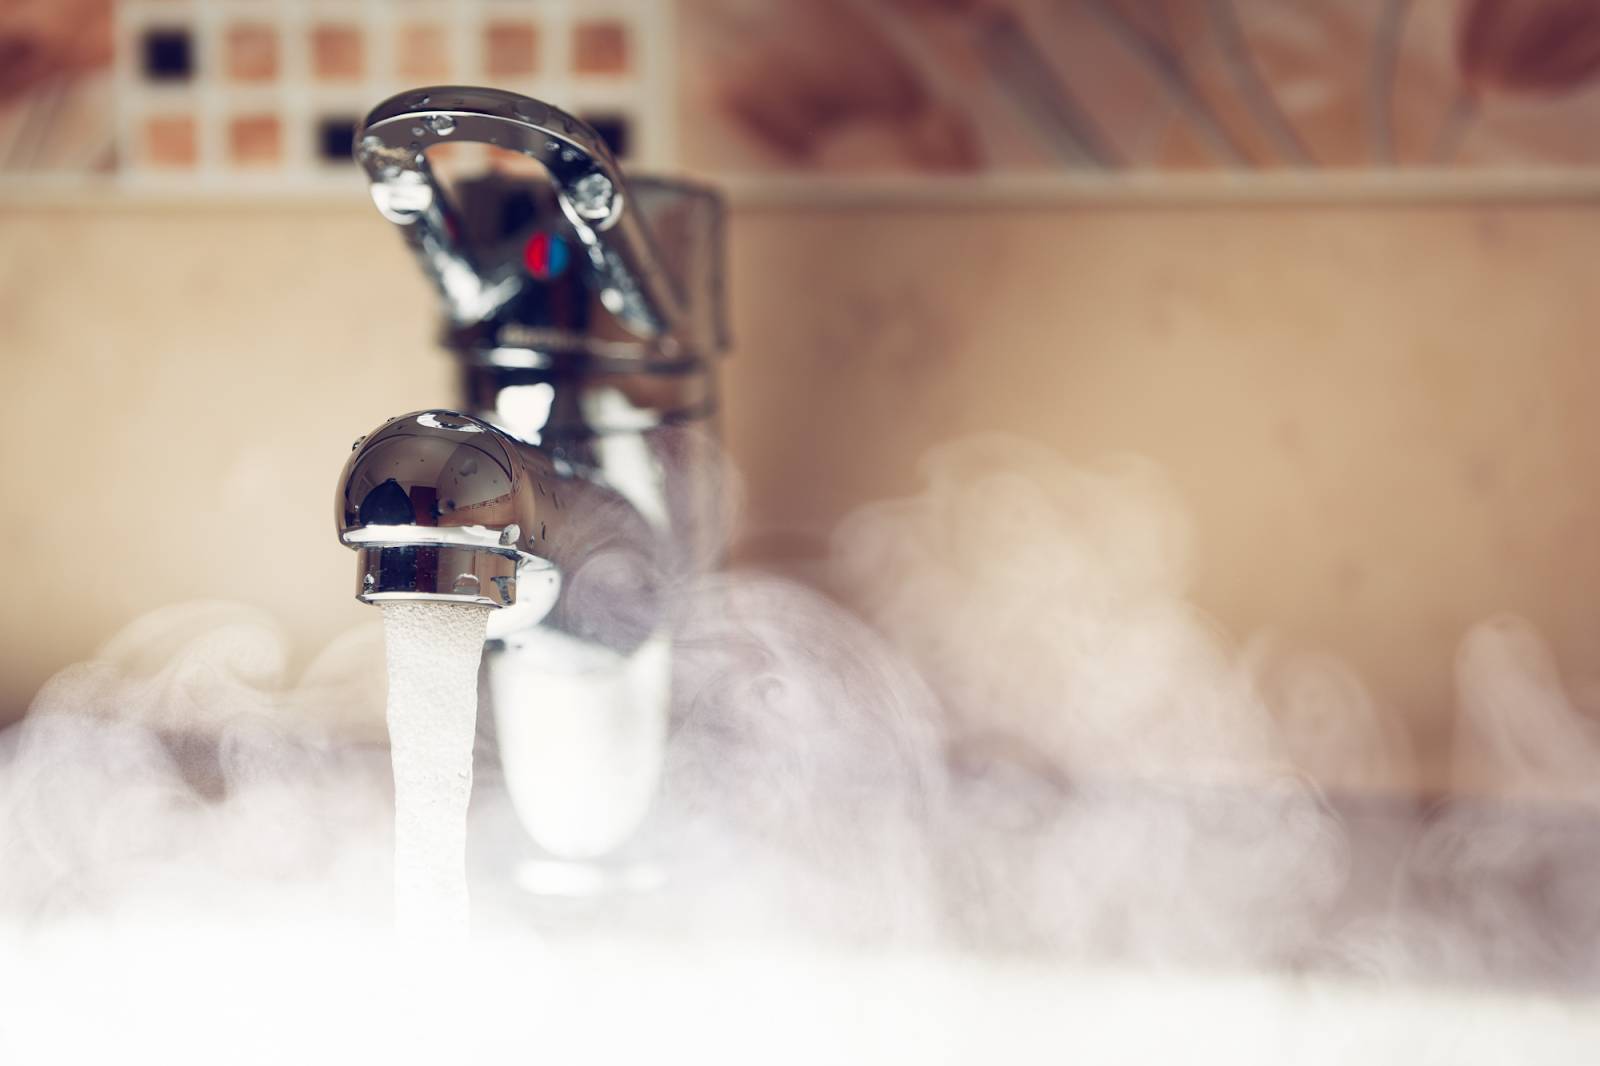 A faucet with hot water running and steam rising up.